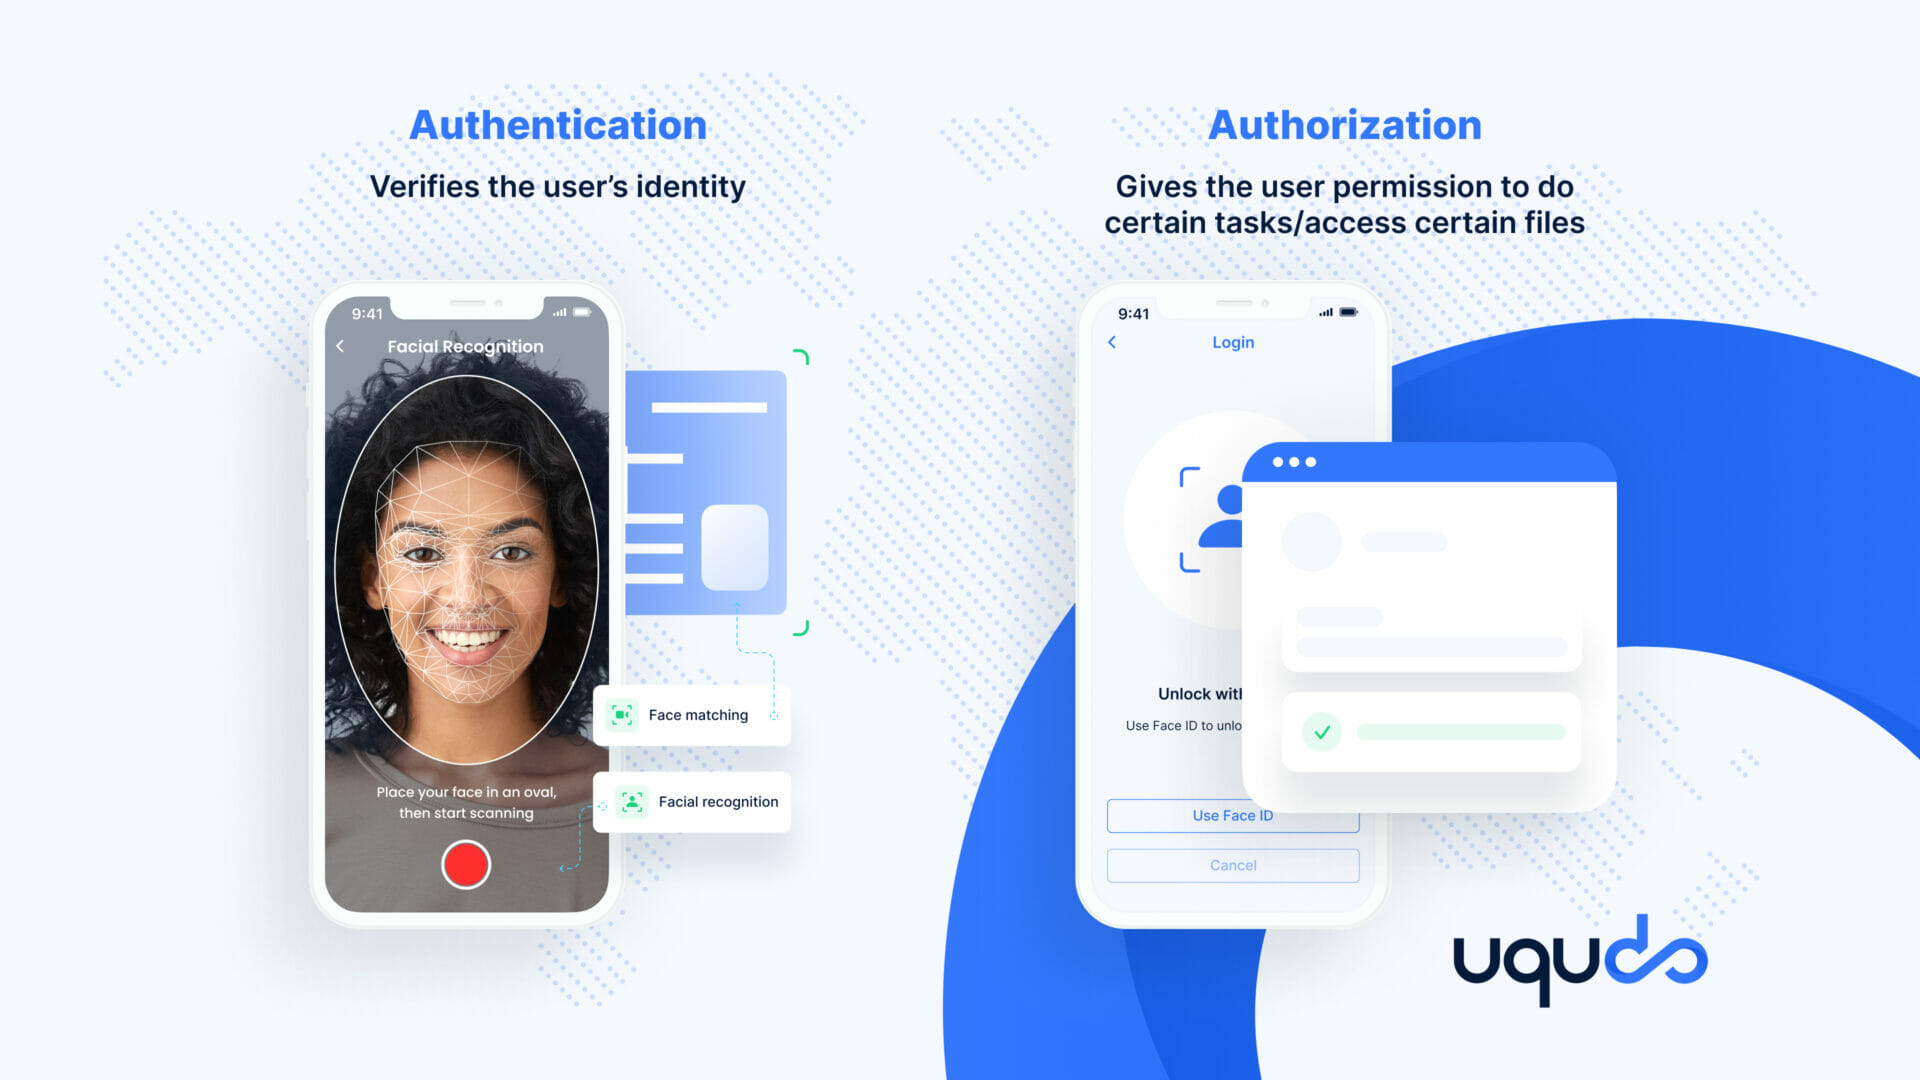 How does authentication vary from authorization?